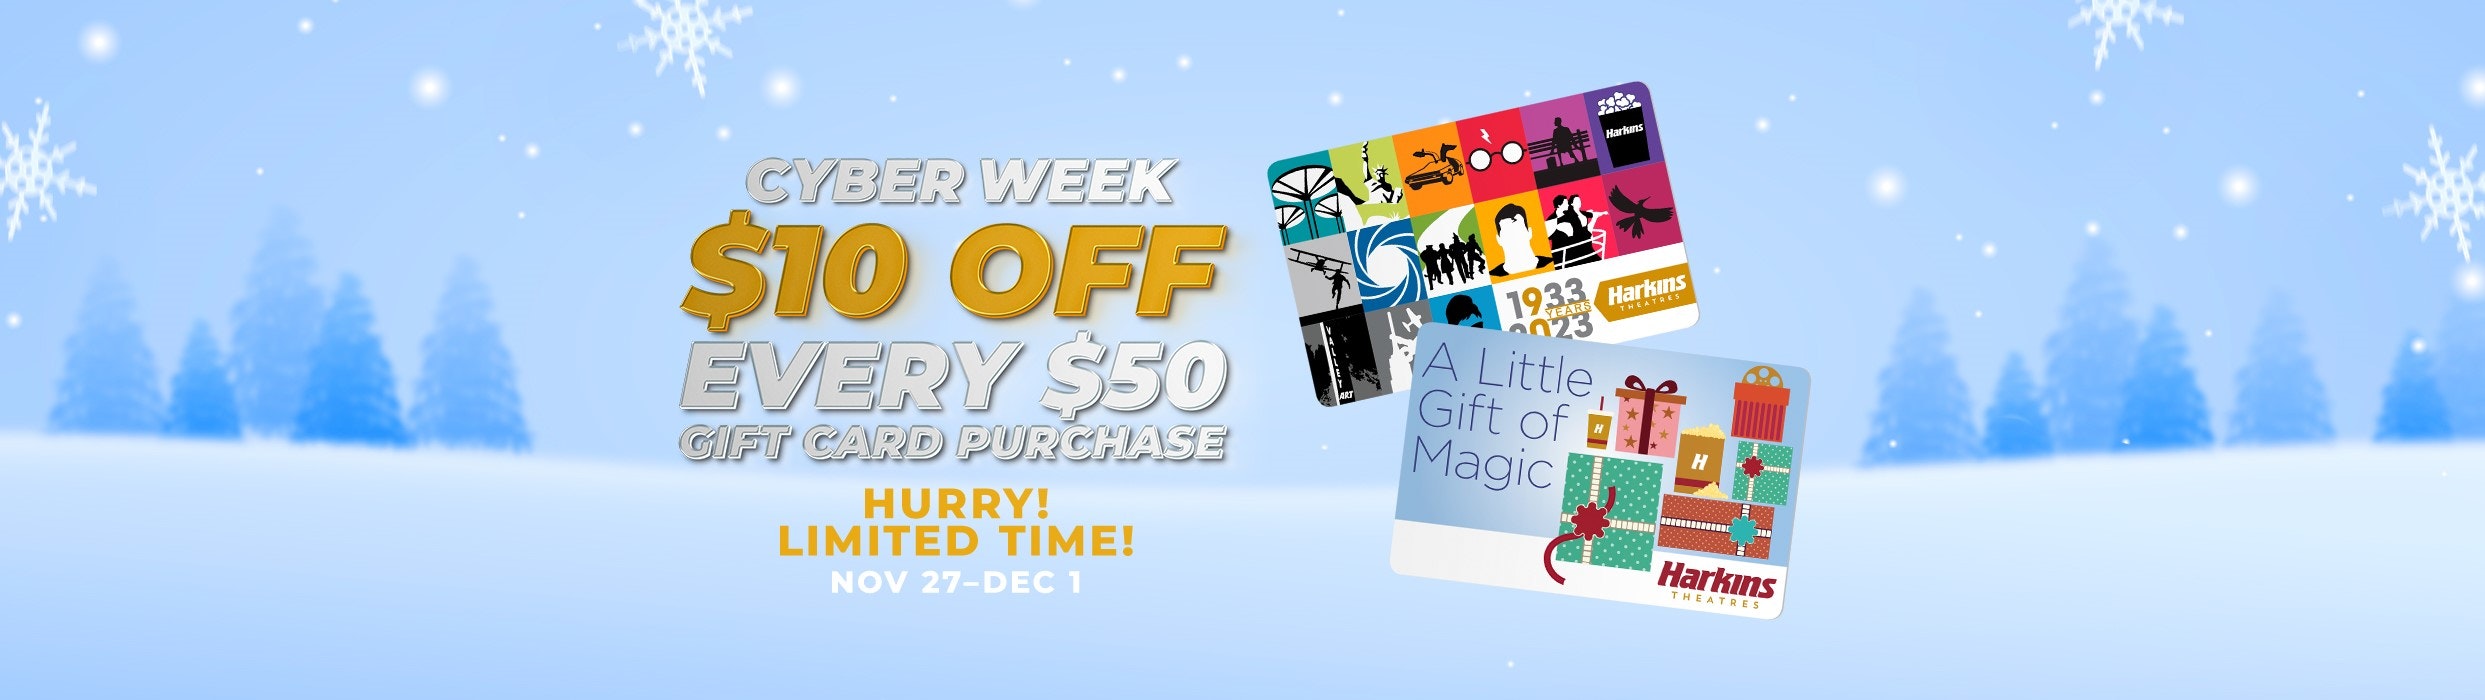 Now through Dec.1 get $10 off any $50 gift card purchase only at Harkins!